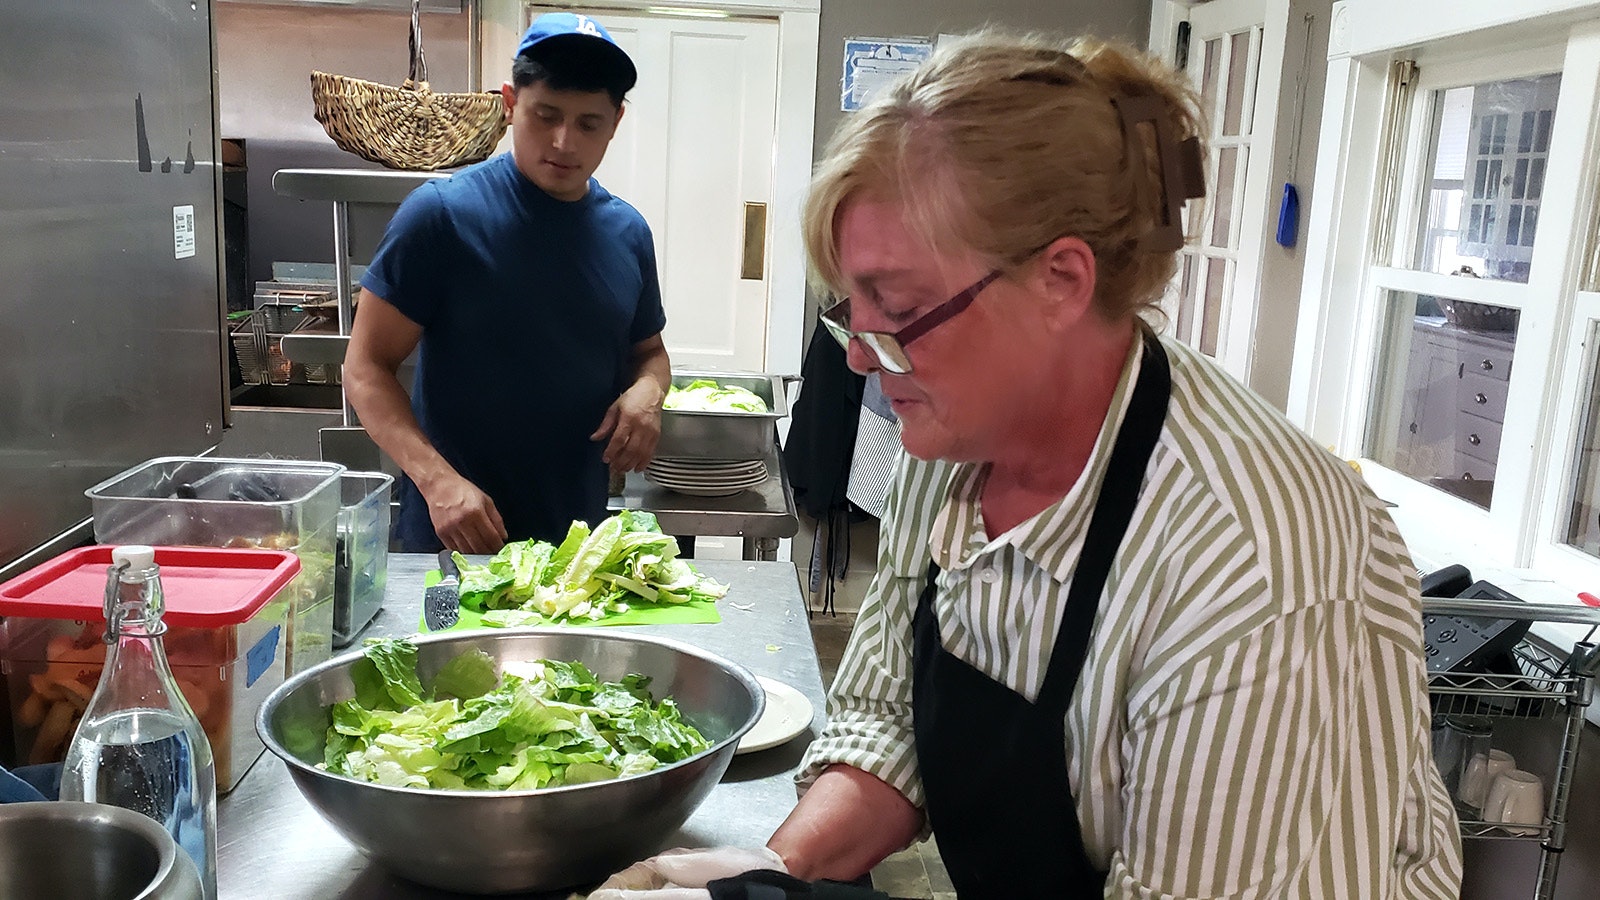 Preparing salads in the kitchen of the cookhouse.